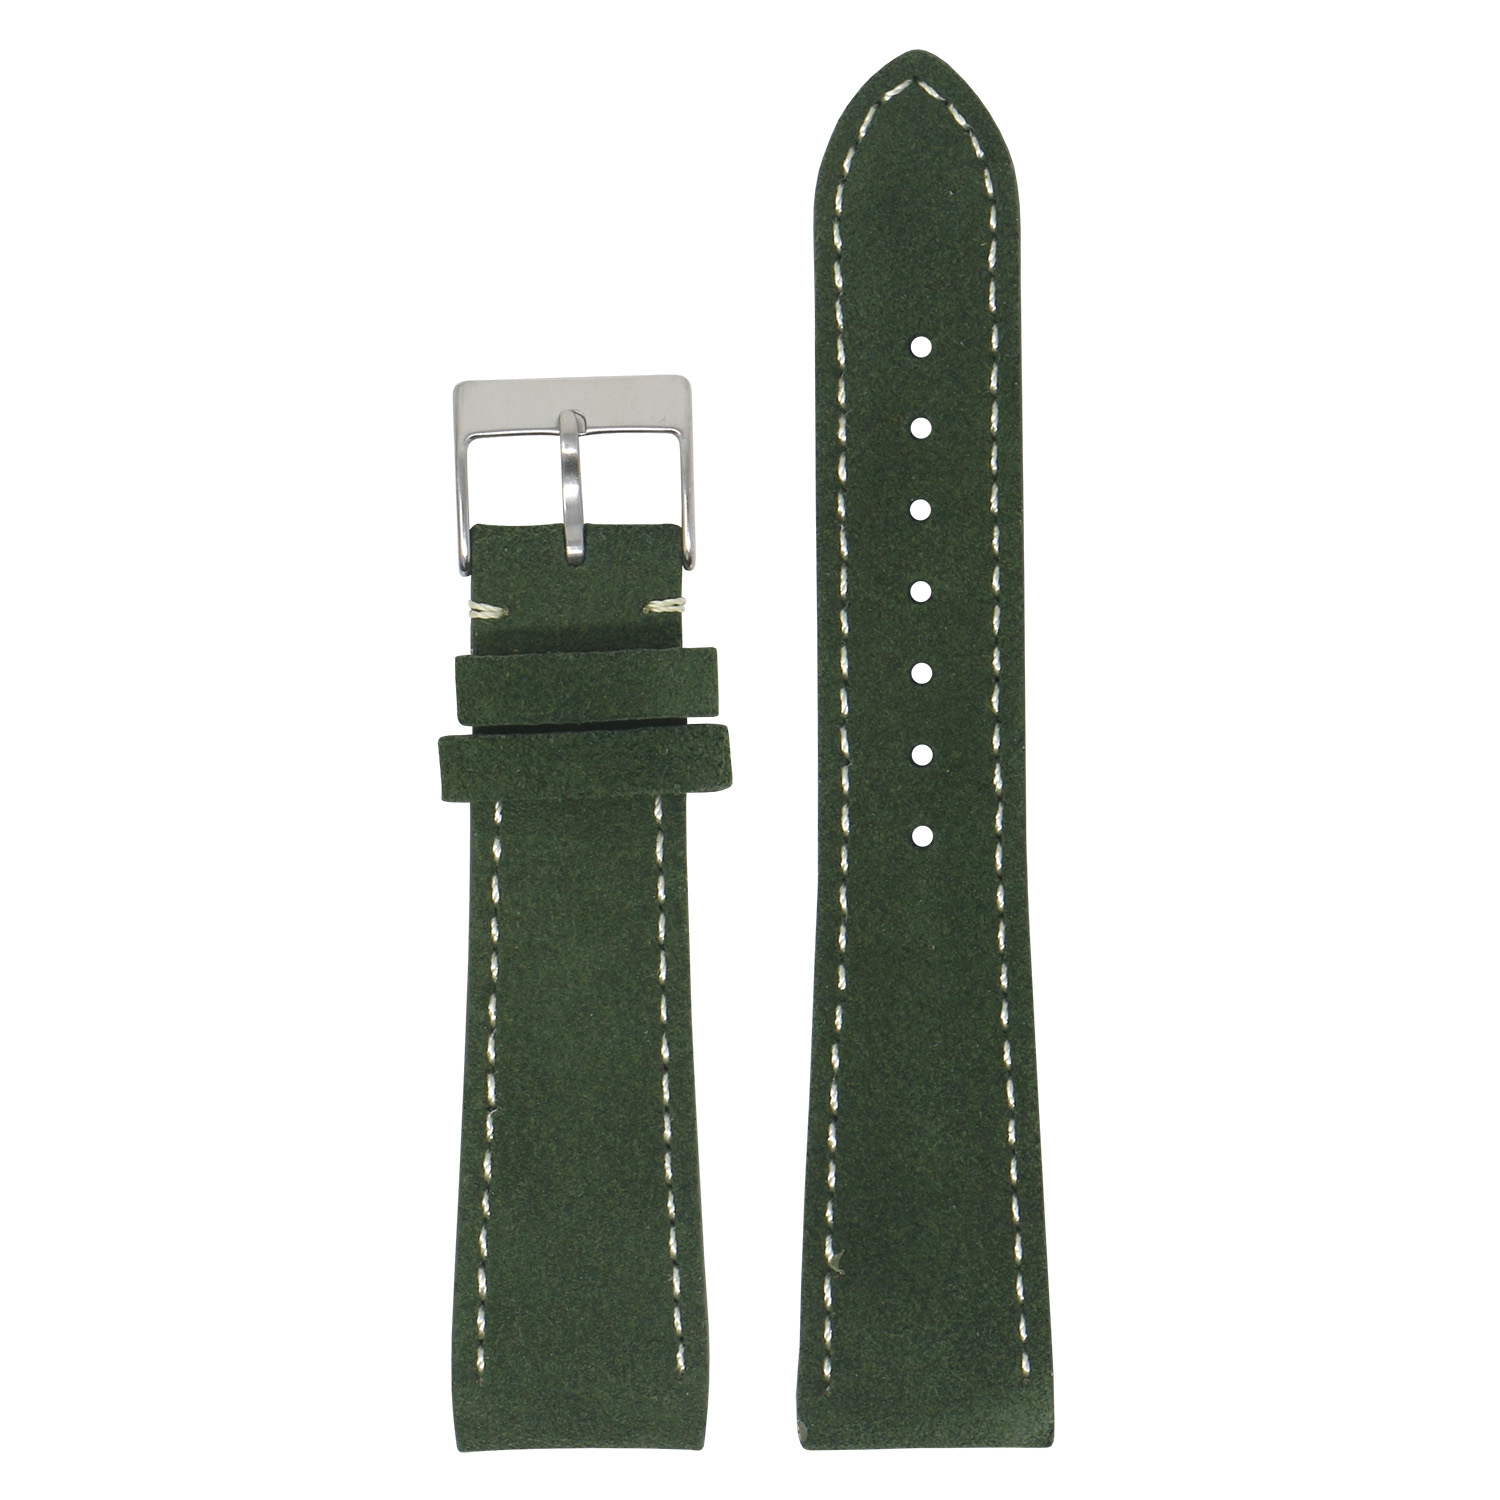 StrapsCo Classic Suede Watch Band Strap (Short, Standard, Long) for Fitbit Charge 4 & Charge 3 - Standard - Green